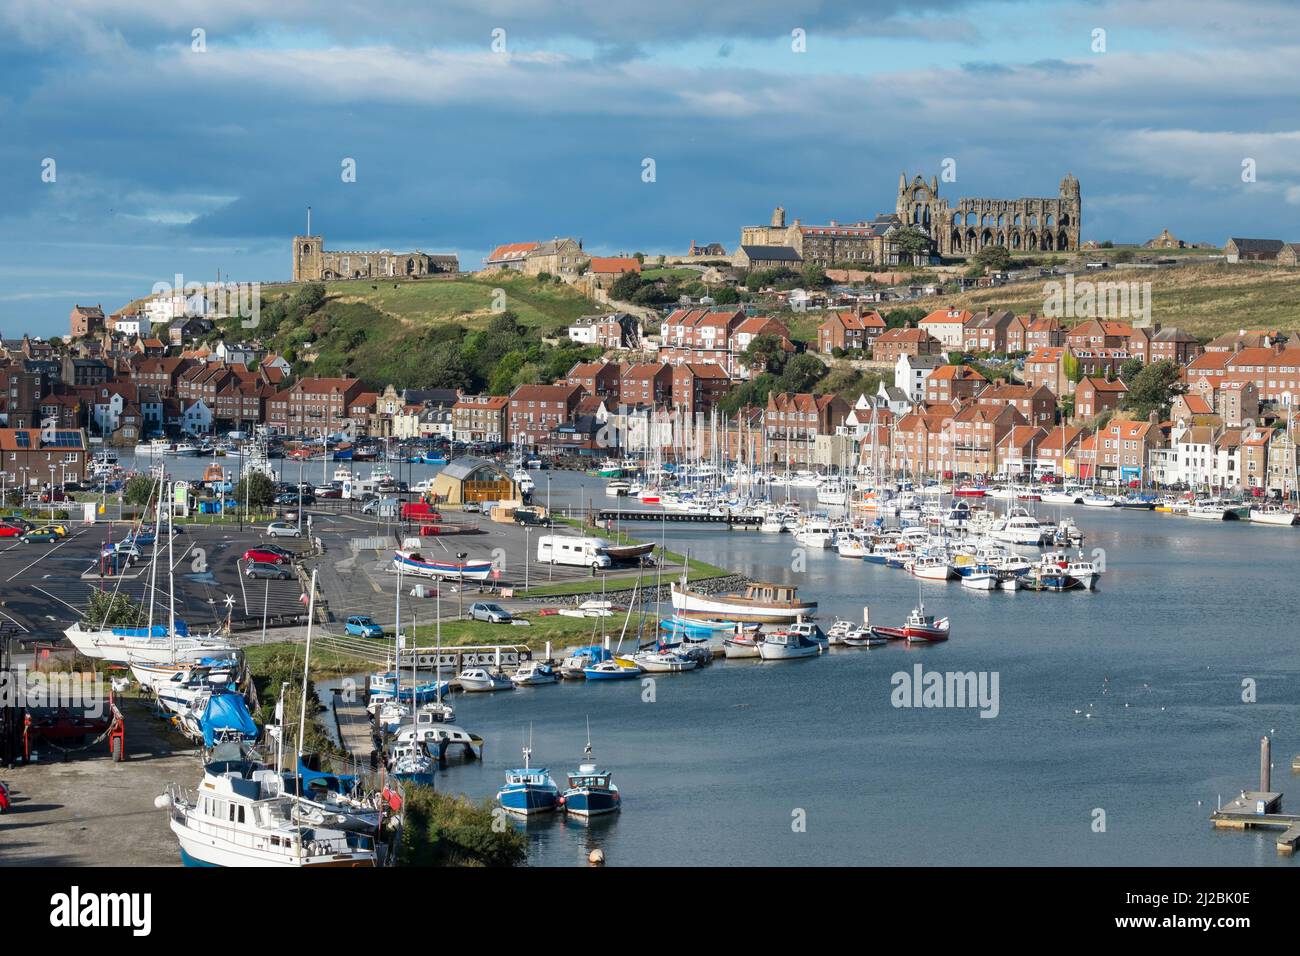 View of Whitby harbour showing the Church and Abbey. Stock Photo